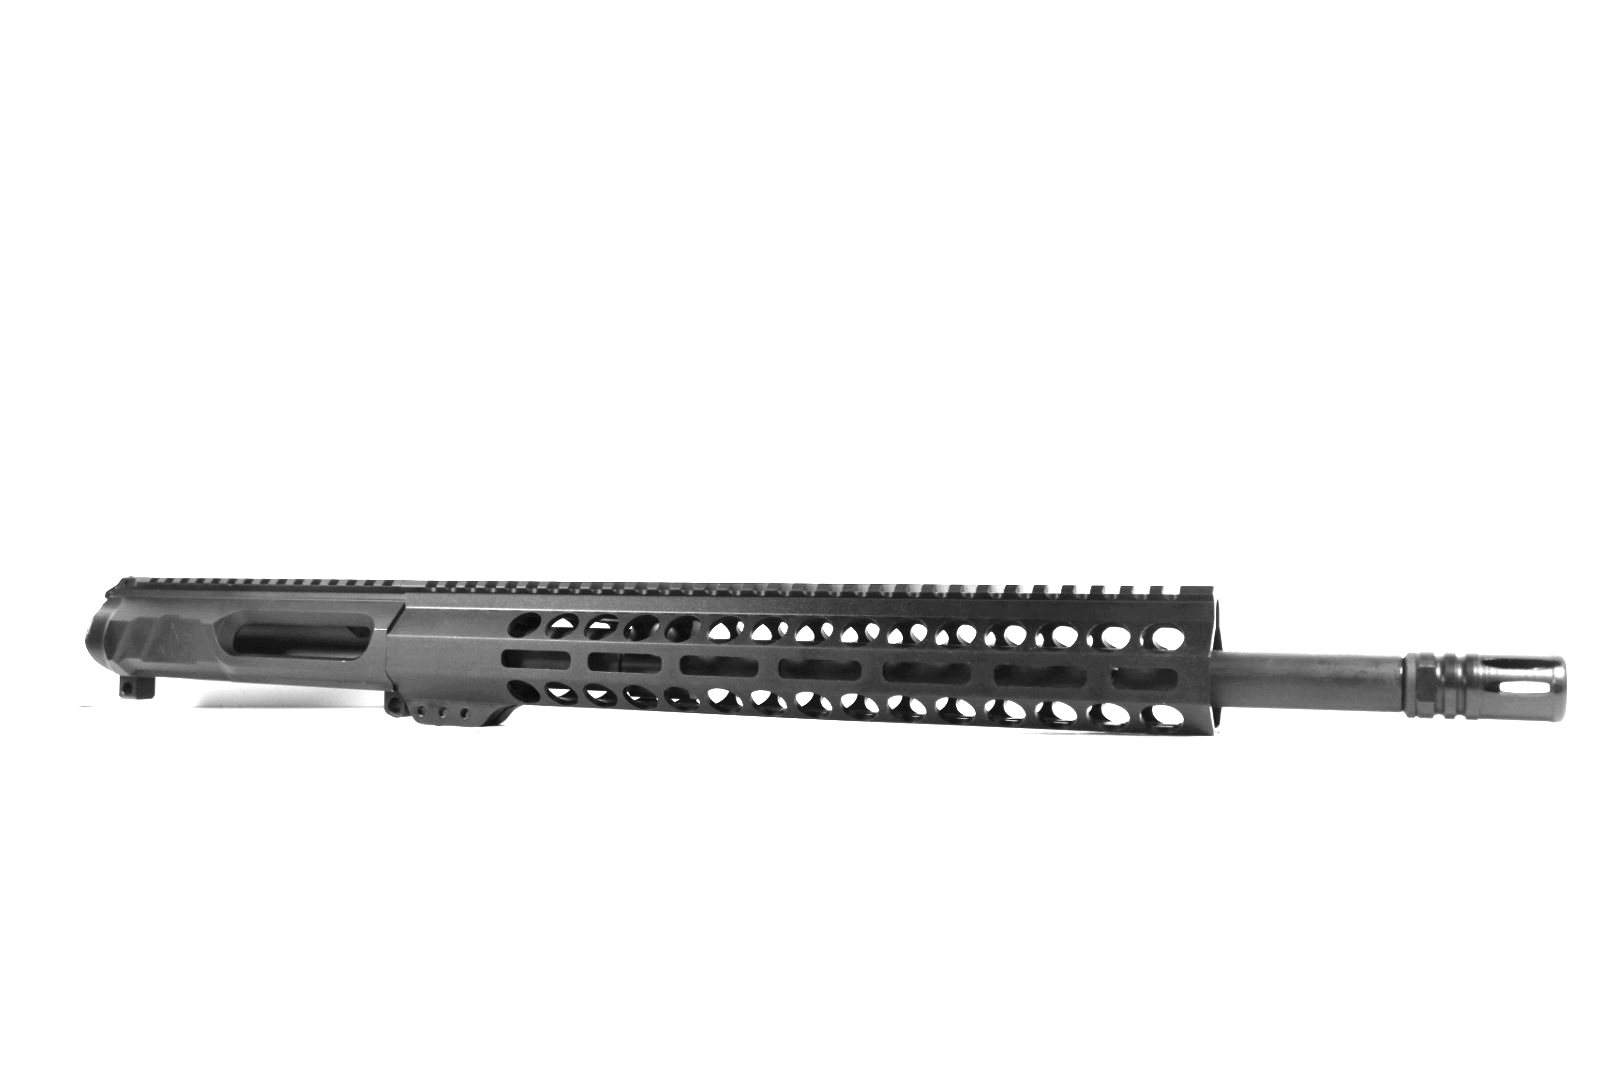 16 inch AR-15 Non Reciprocating Side Charging 300 Blackout Melonite Upper